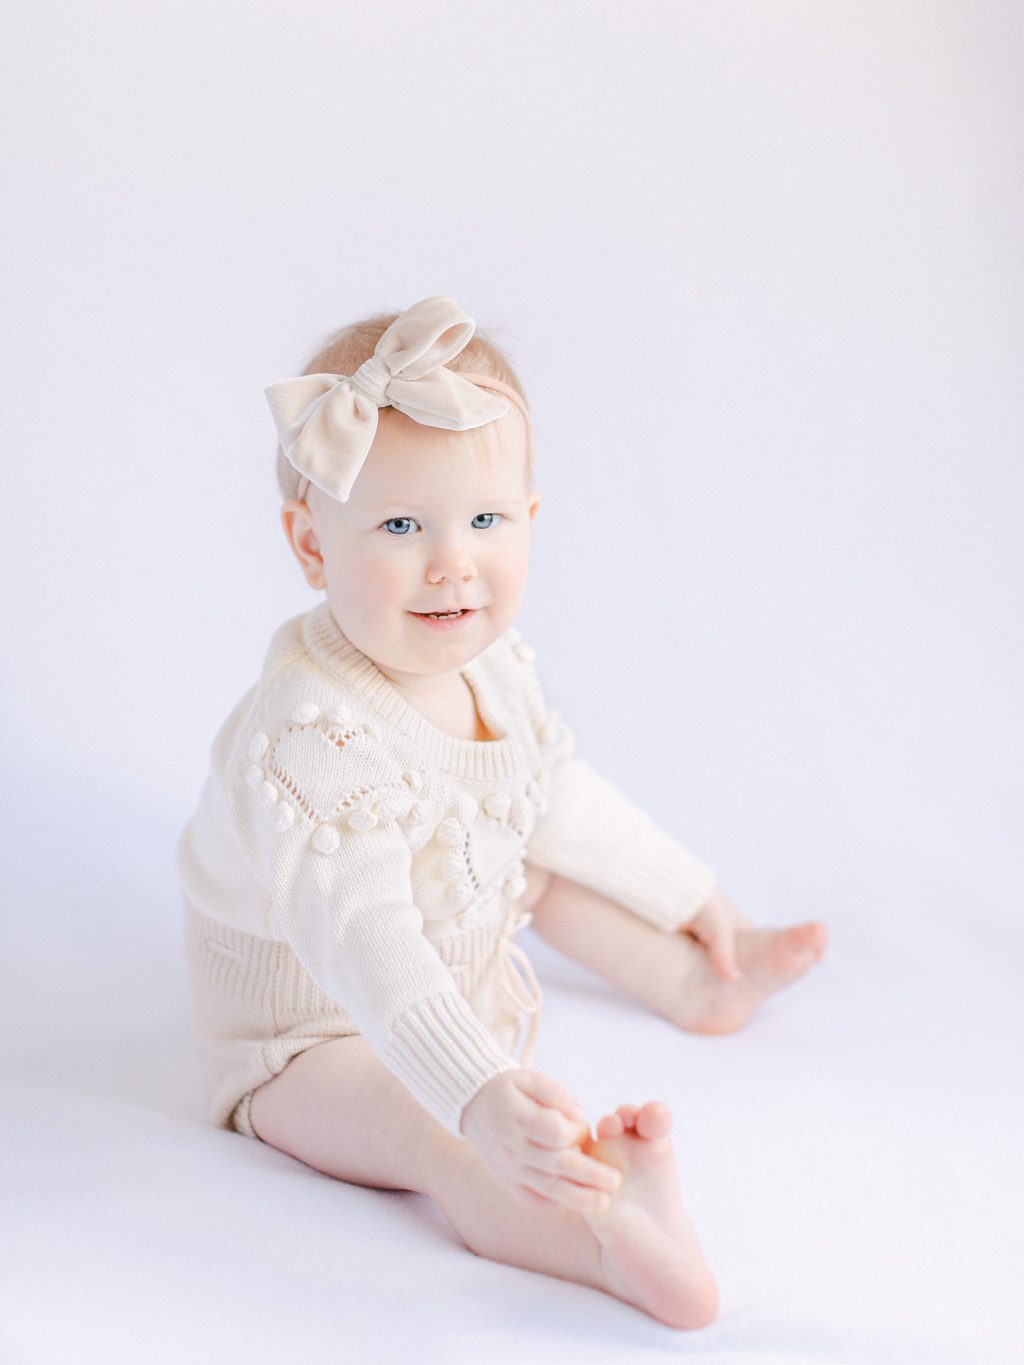 Photo of baby girl on white backdrop for her first birthday baby photography shoot in Knoxville, TN.